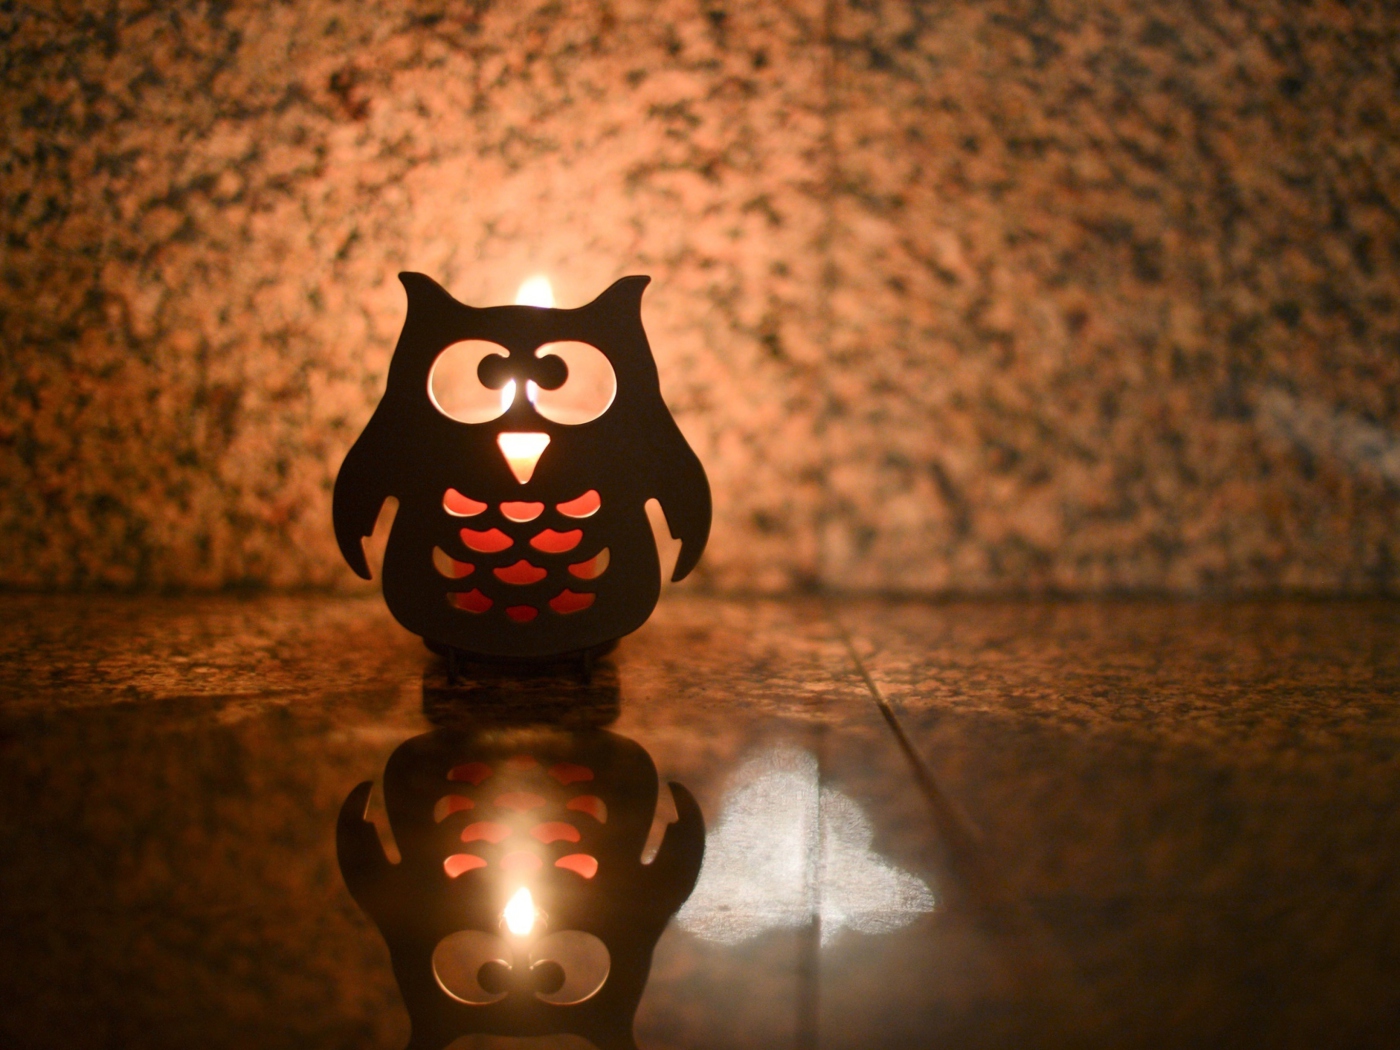 Owl Candle wallpaper 1400x1050